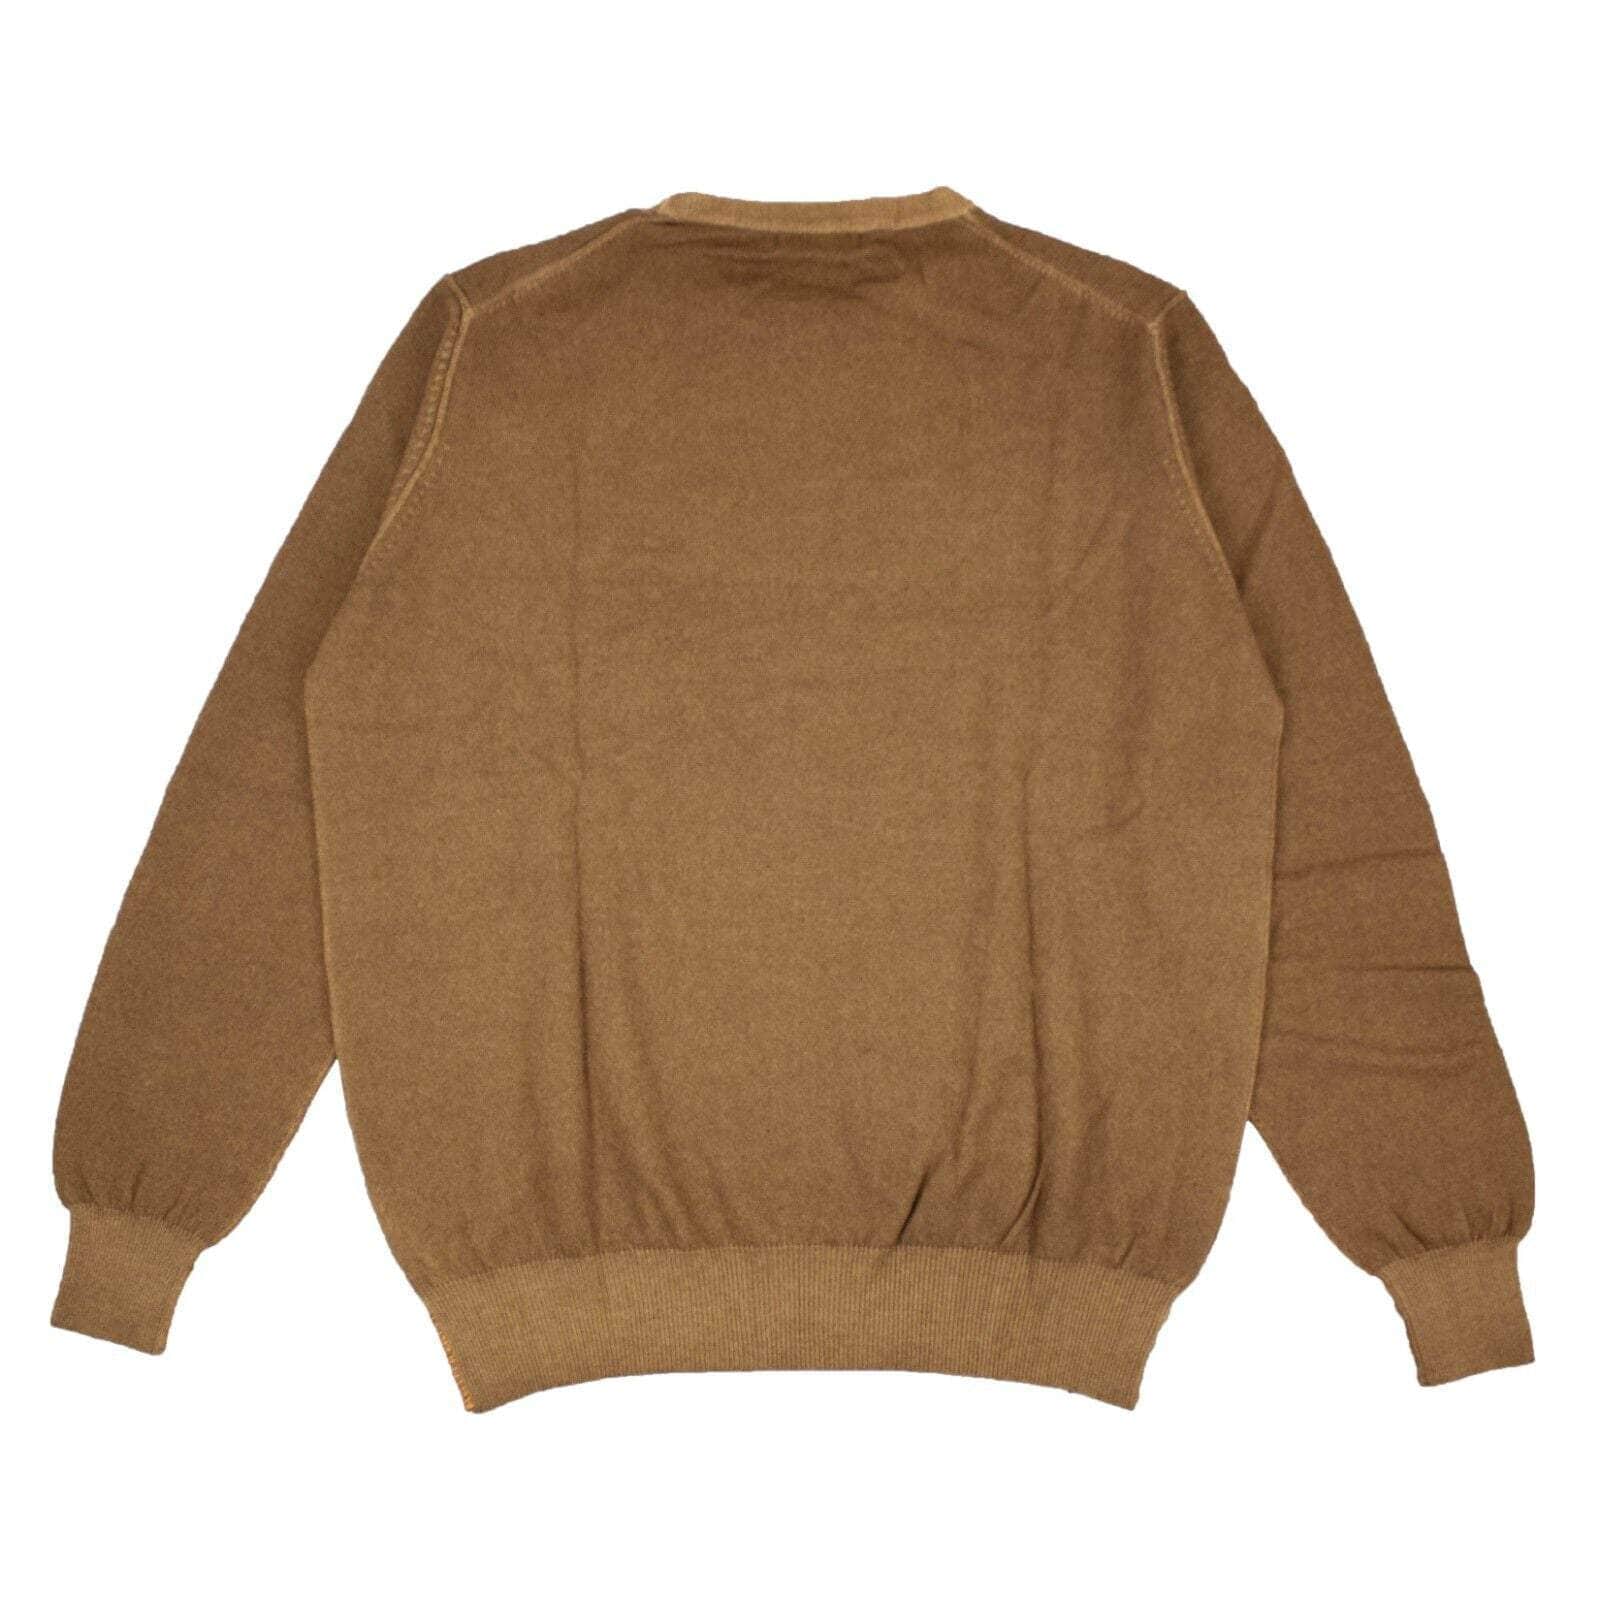 President's channelenable-all, chicmi, couponcollection, gender-mens, main-clothing, mens-cashmere-sweaters, mens-shoes, presidents, size-l, size-xl, size-xxl, under-250 Camel Brown Wool And Cashmere Crewneck Sweater